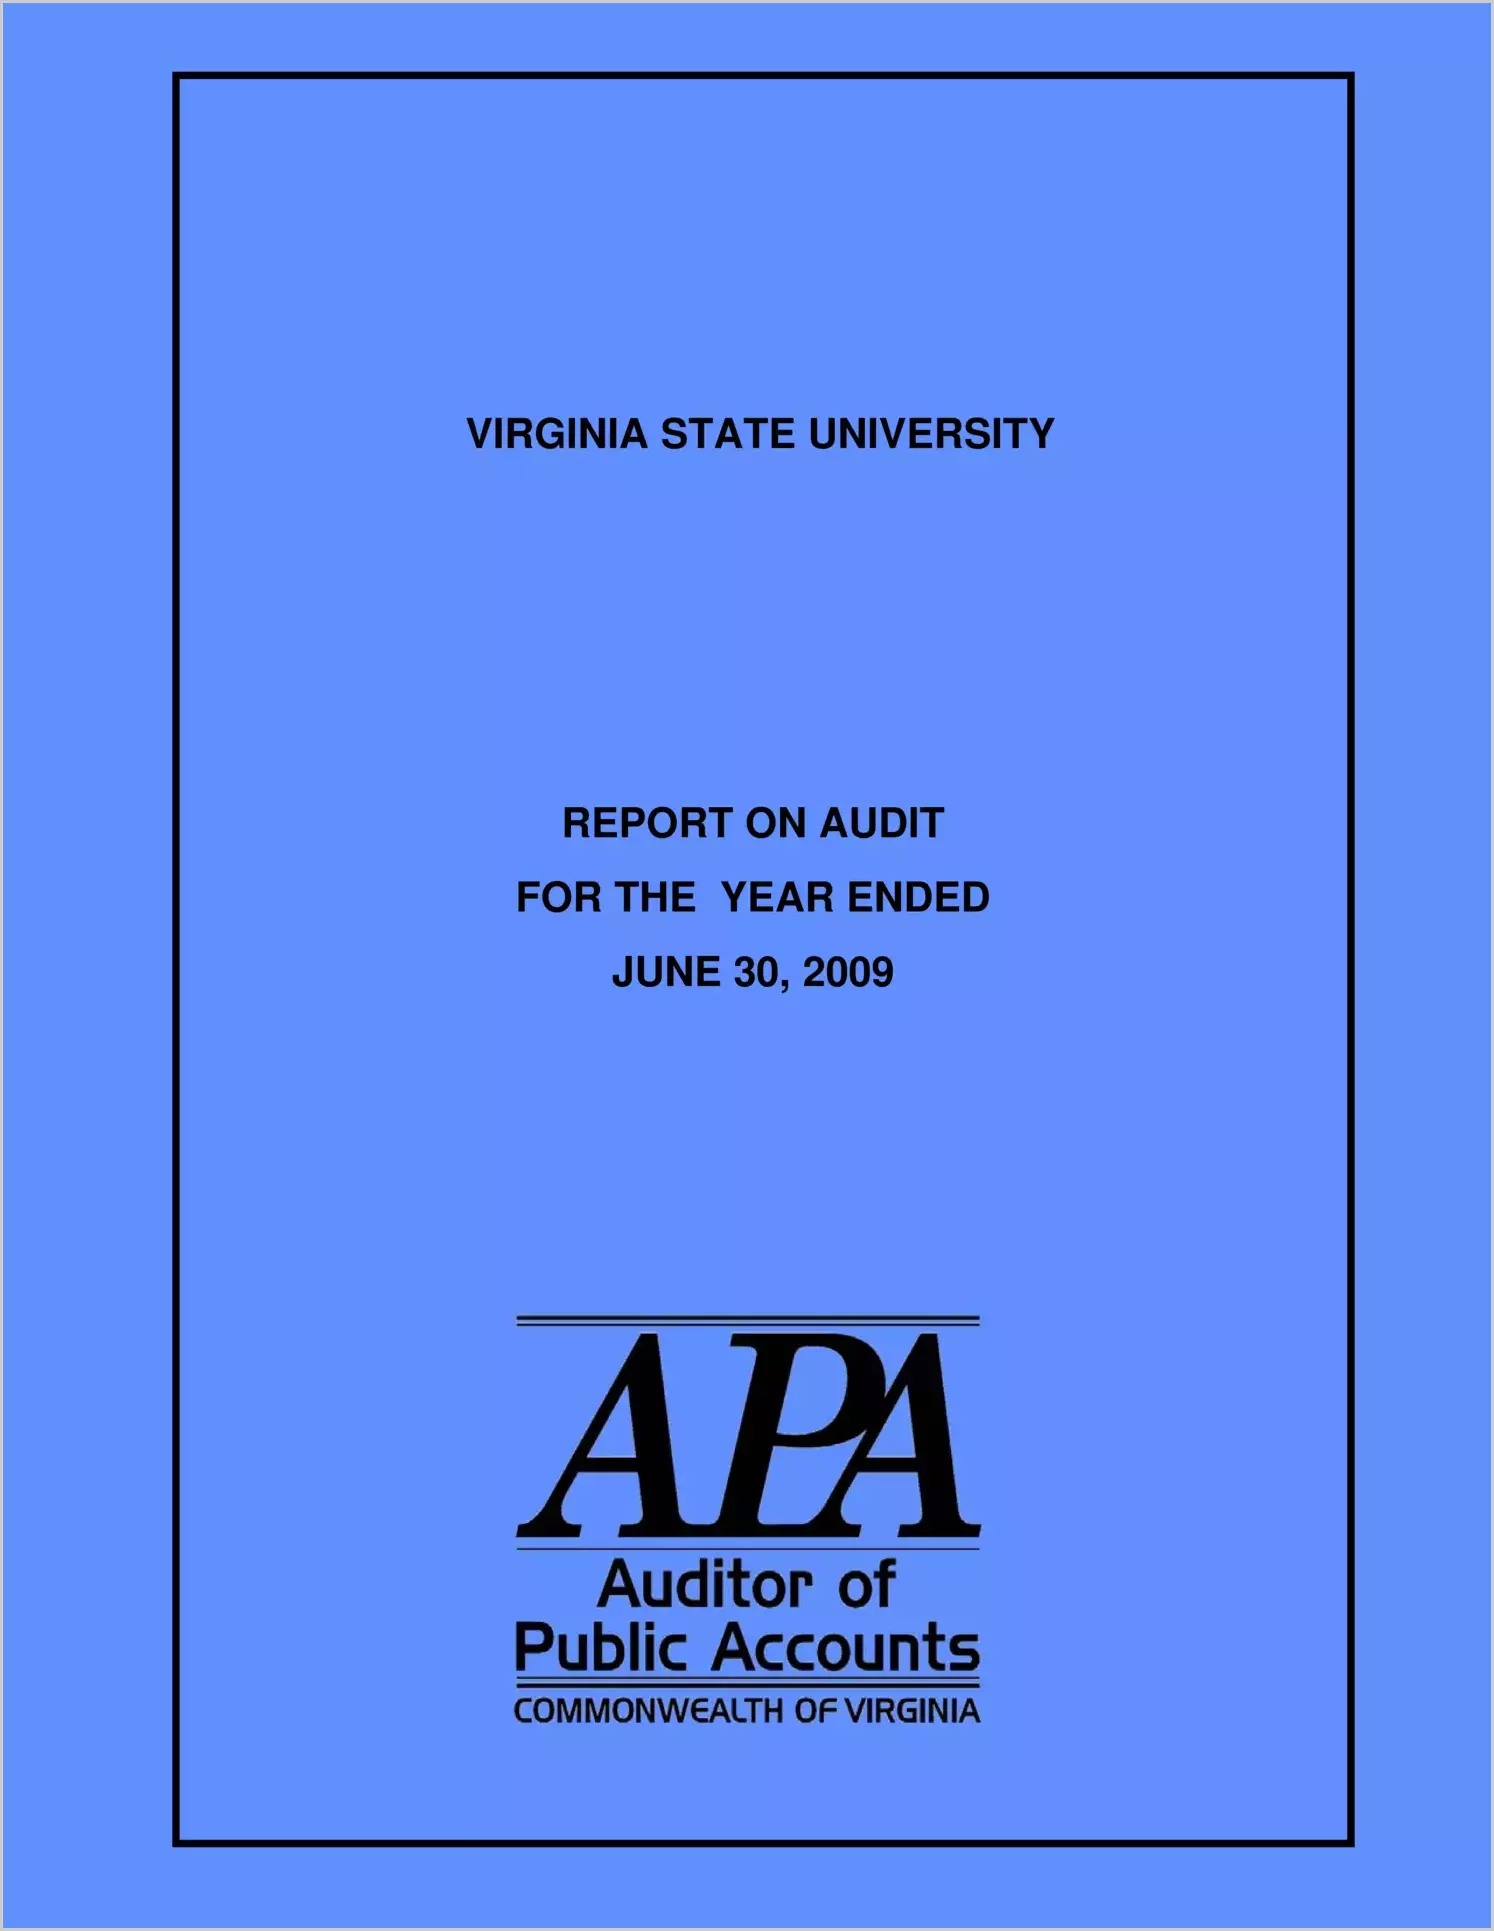 Virginia State University for the year ended June 30, 2009